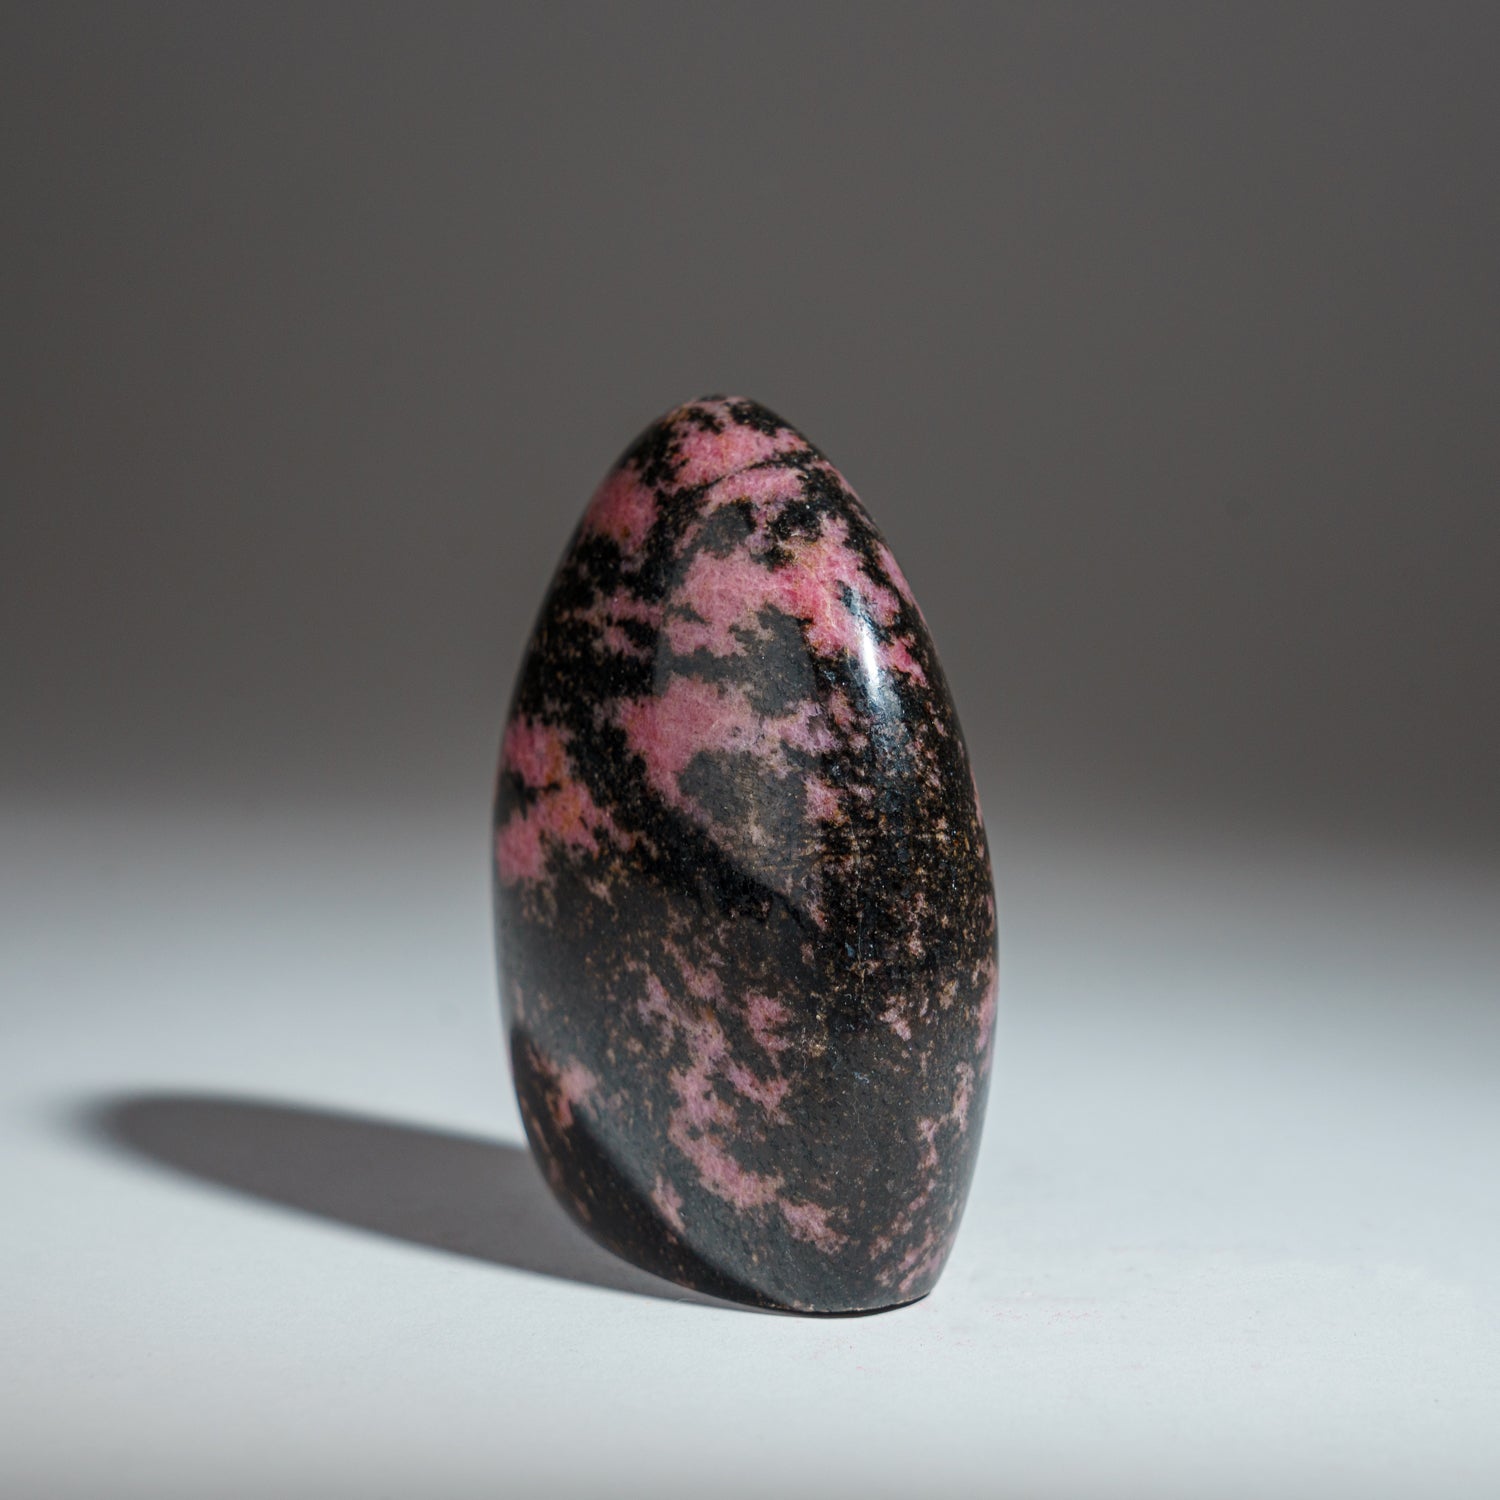 Polished Imperial Rhodonite Freeform from Madagascar (1.4 lbs)